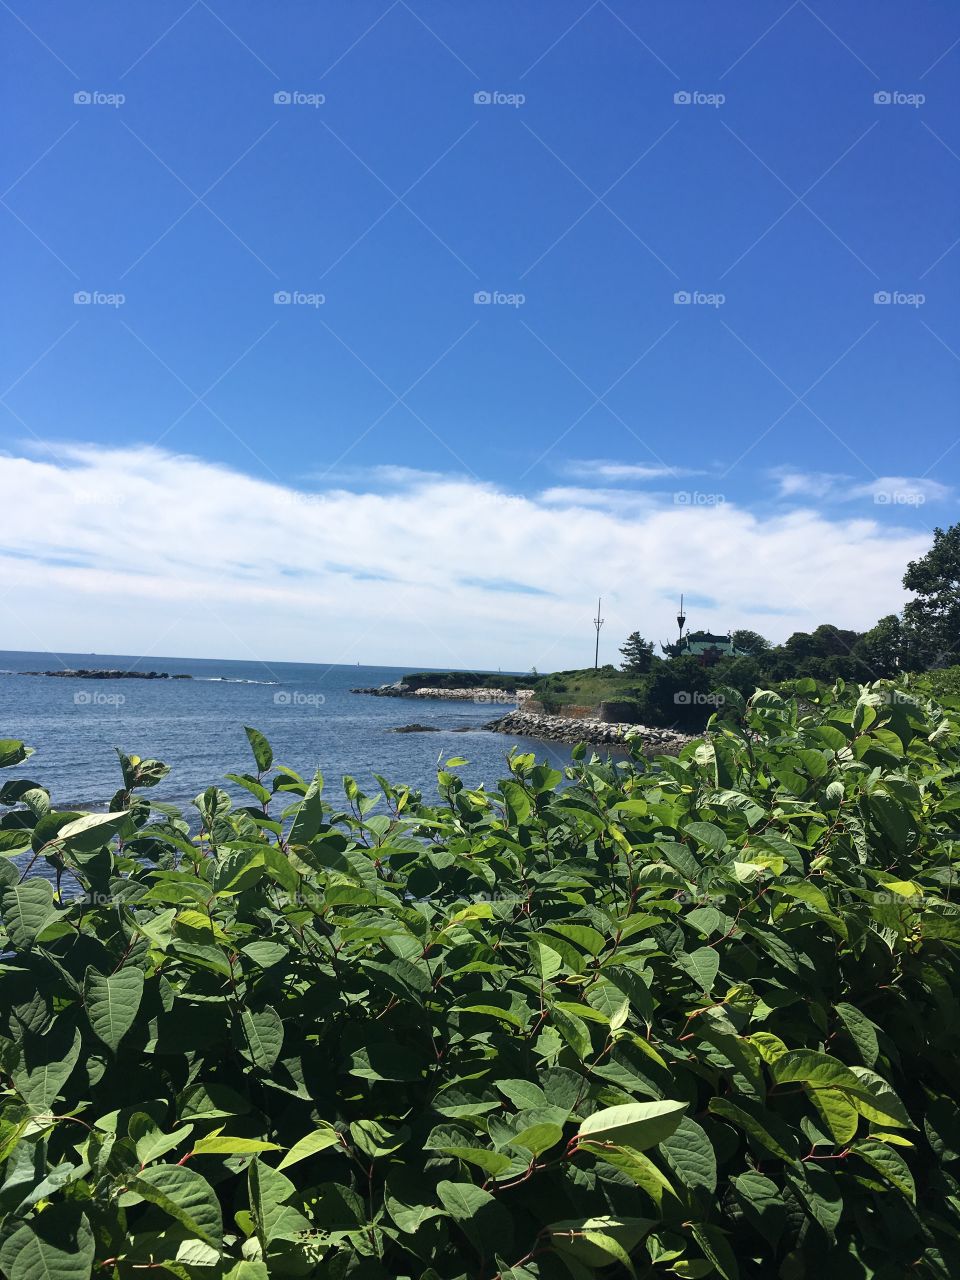 A view of the ocean behind a branch. Taken on the Cliff Walk pathway around the Newport mansions in Rhode Island. 